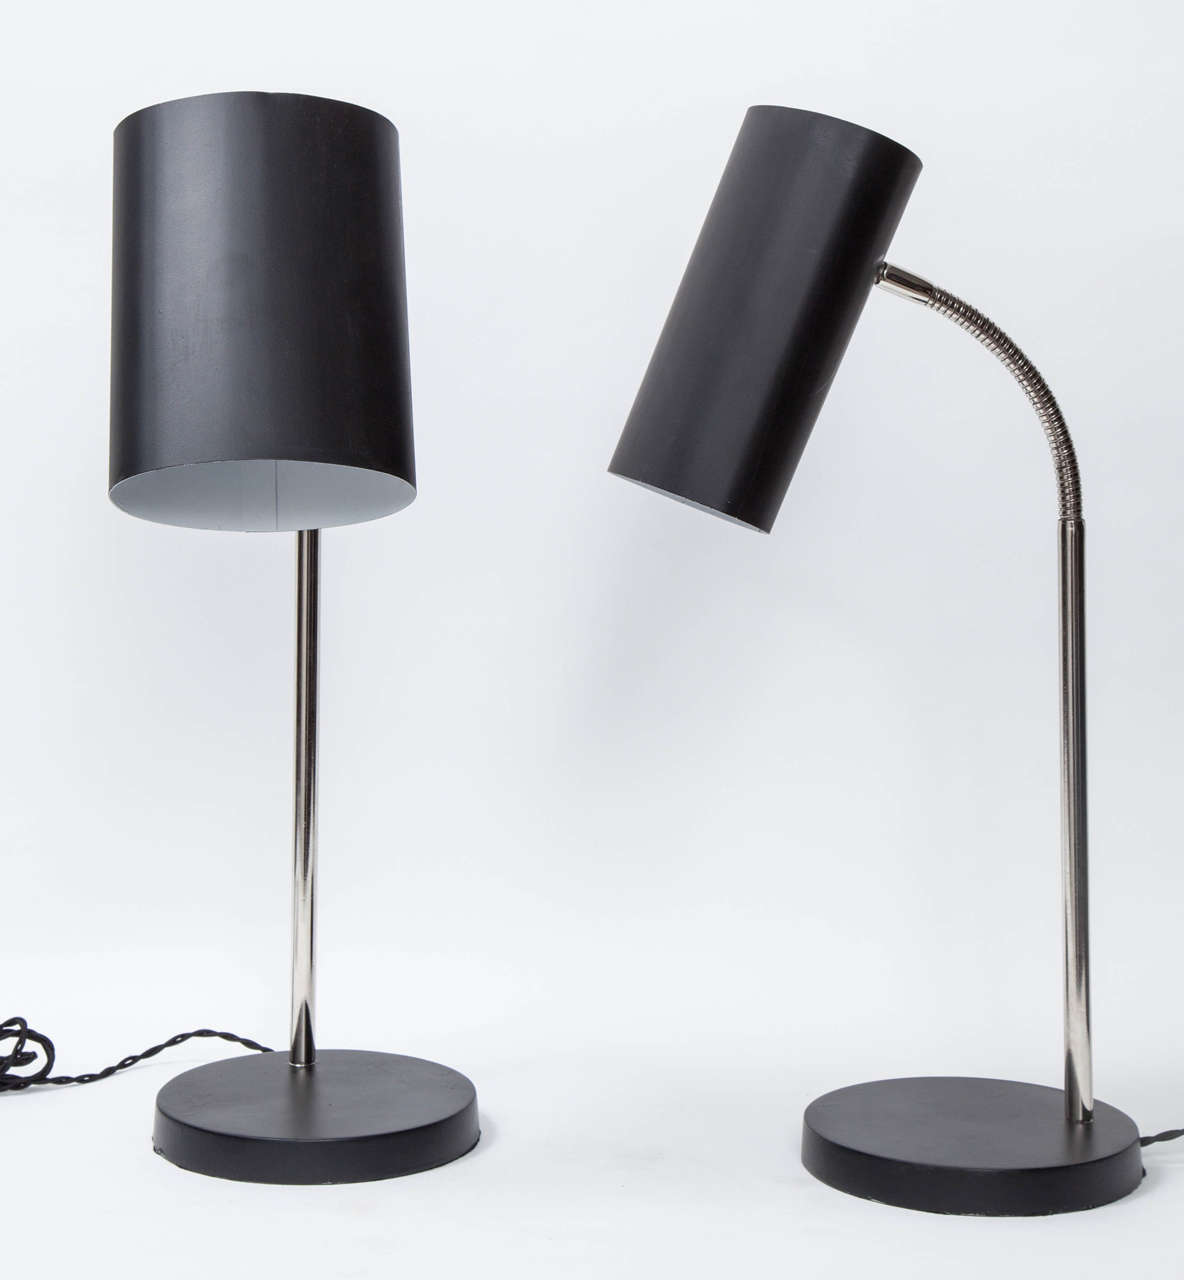 Black painted steel bases and oval cylinder shades joined by a polished nickel flexible neck. Newly restored and rewired for US usage, 1950s.